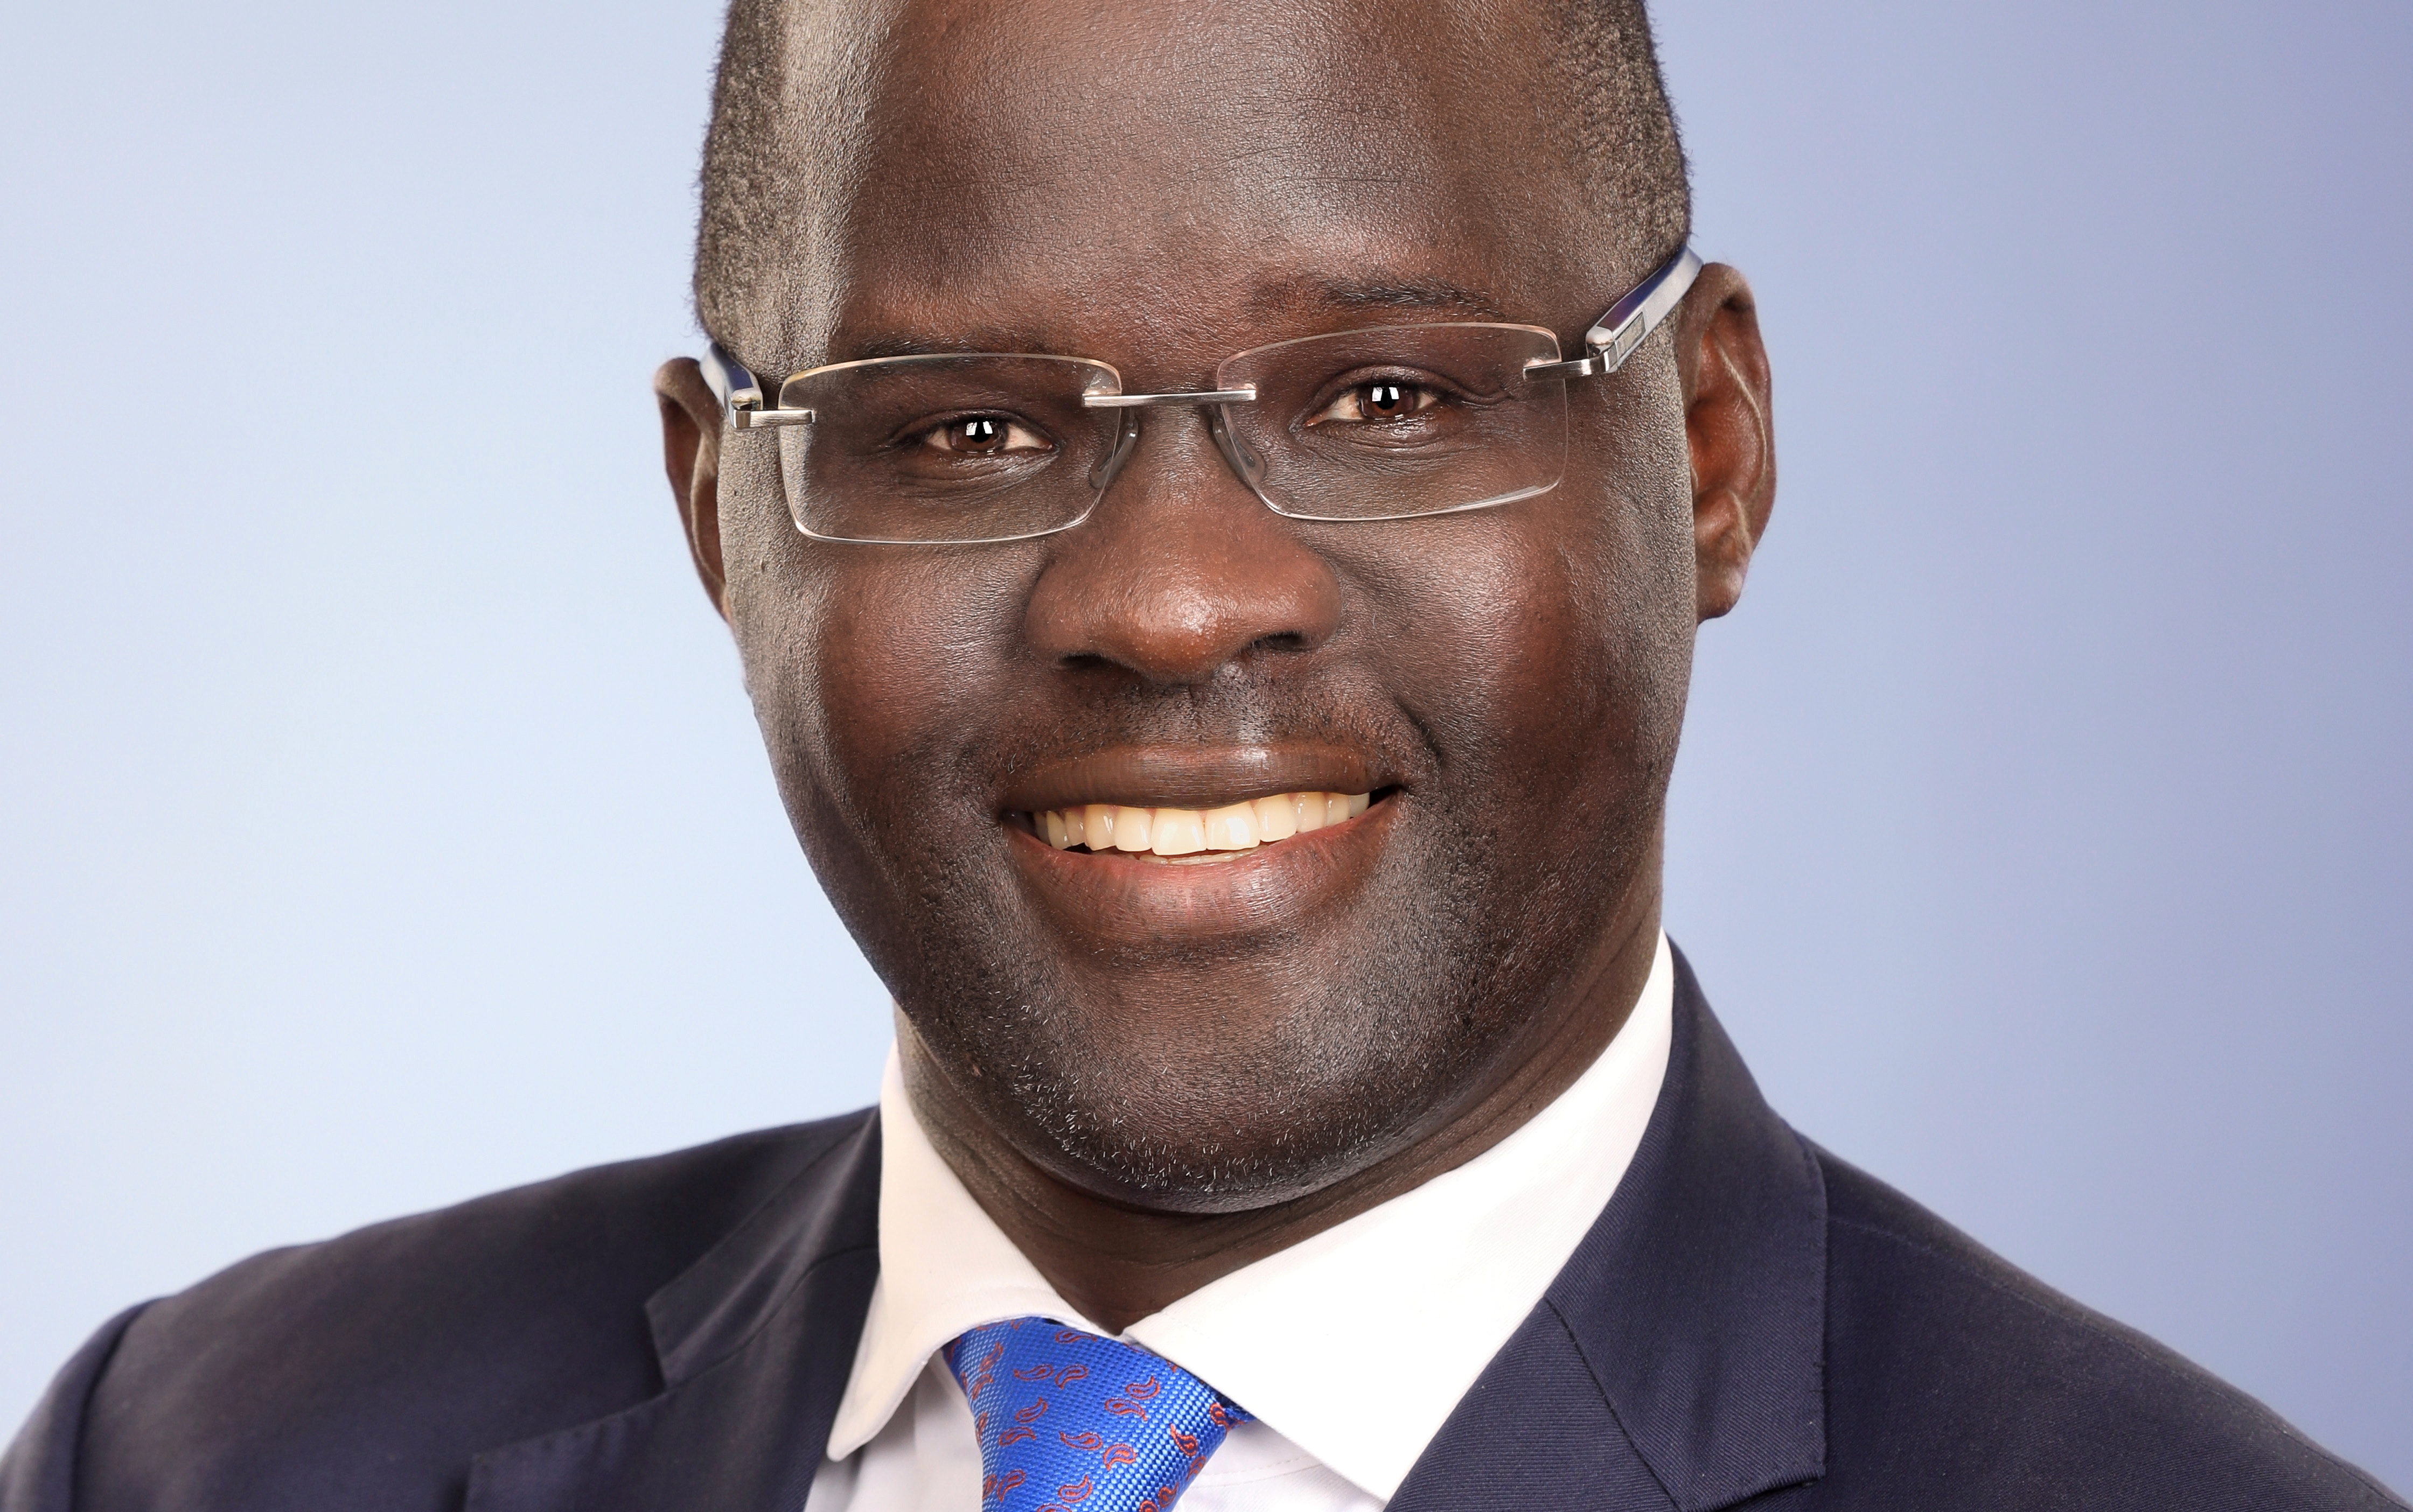 Nicholas Opiyo, director of the Chapter Four Uganda organisation, poses for a portrait